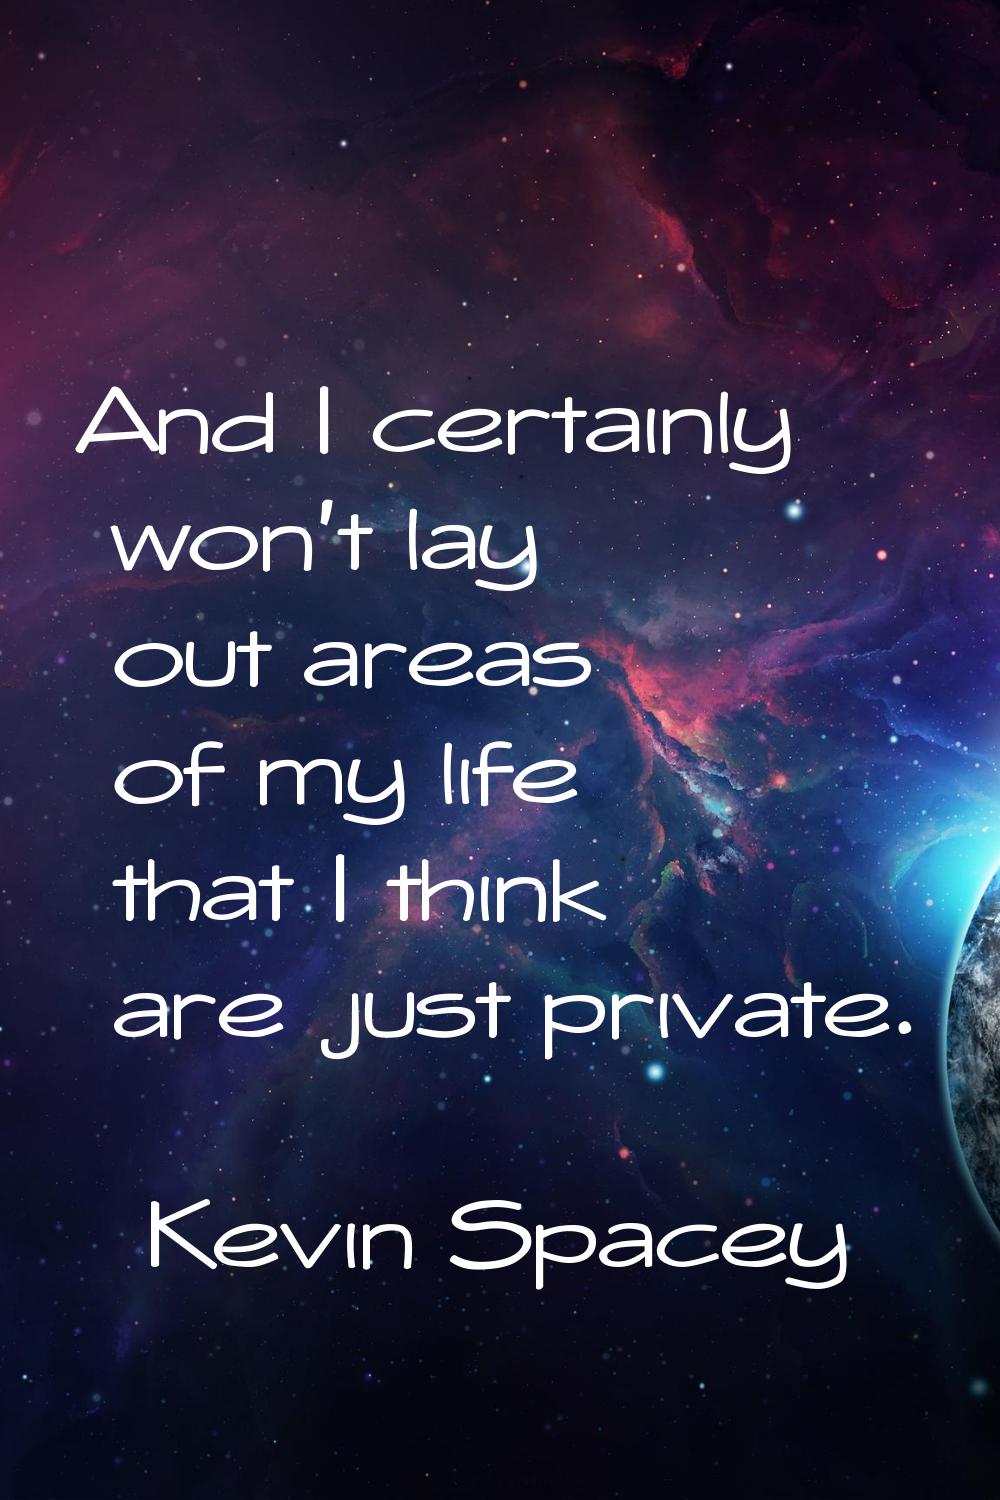 And I certainly won't lay out areas of my life that I think are just private.